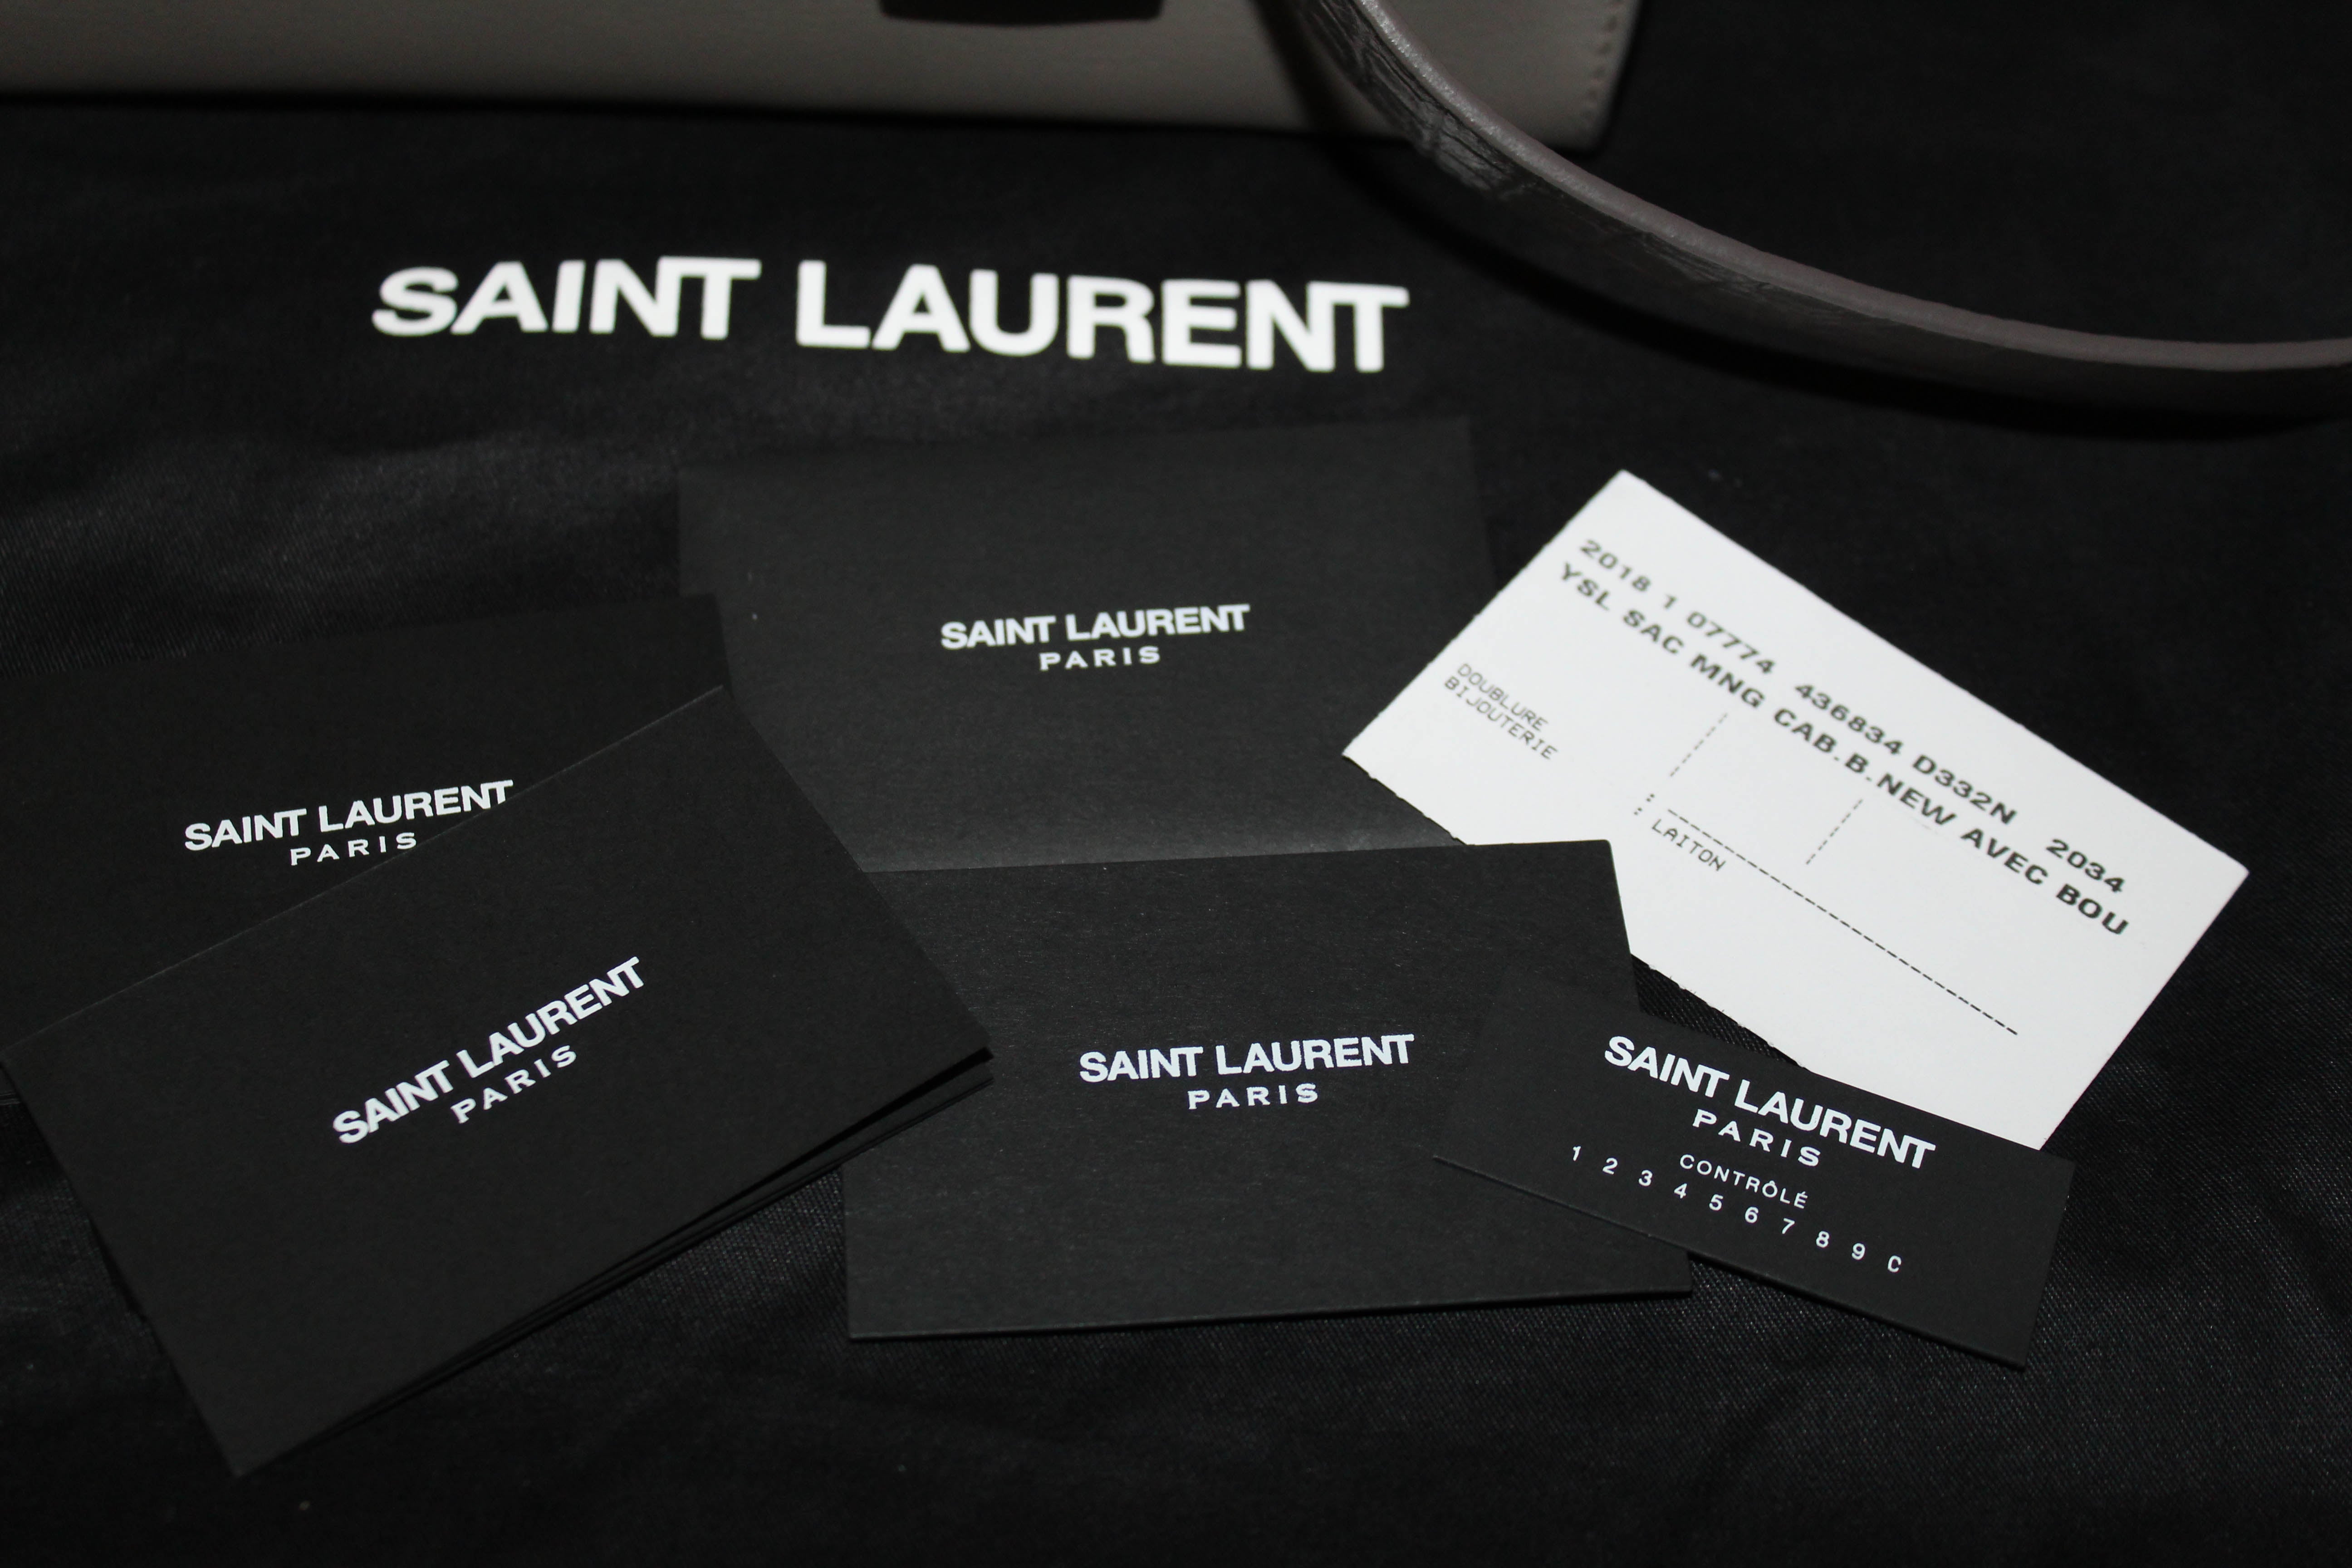 Authentic Yves Saint Laurent YSL Grey Downtown Baby Cabas in Smooth an –  Paris Station Shop